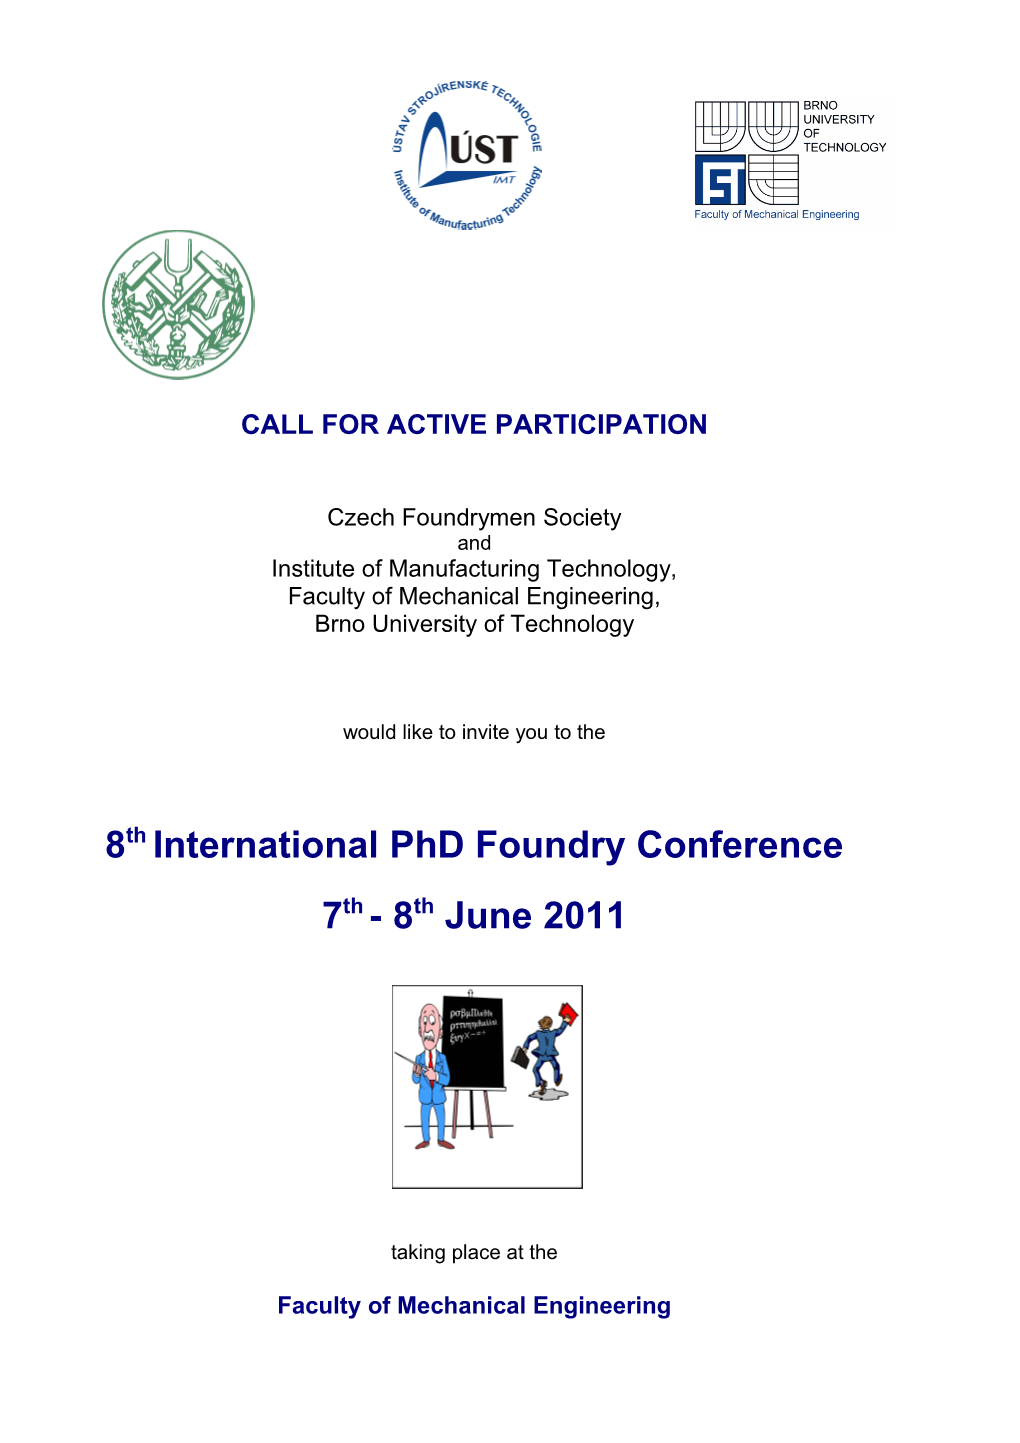 Call for Active Participation